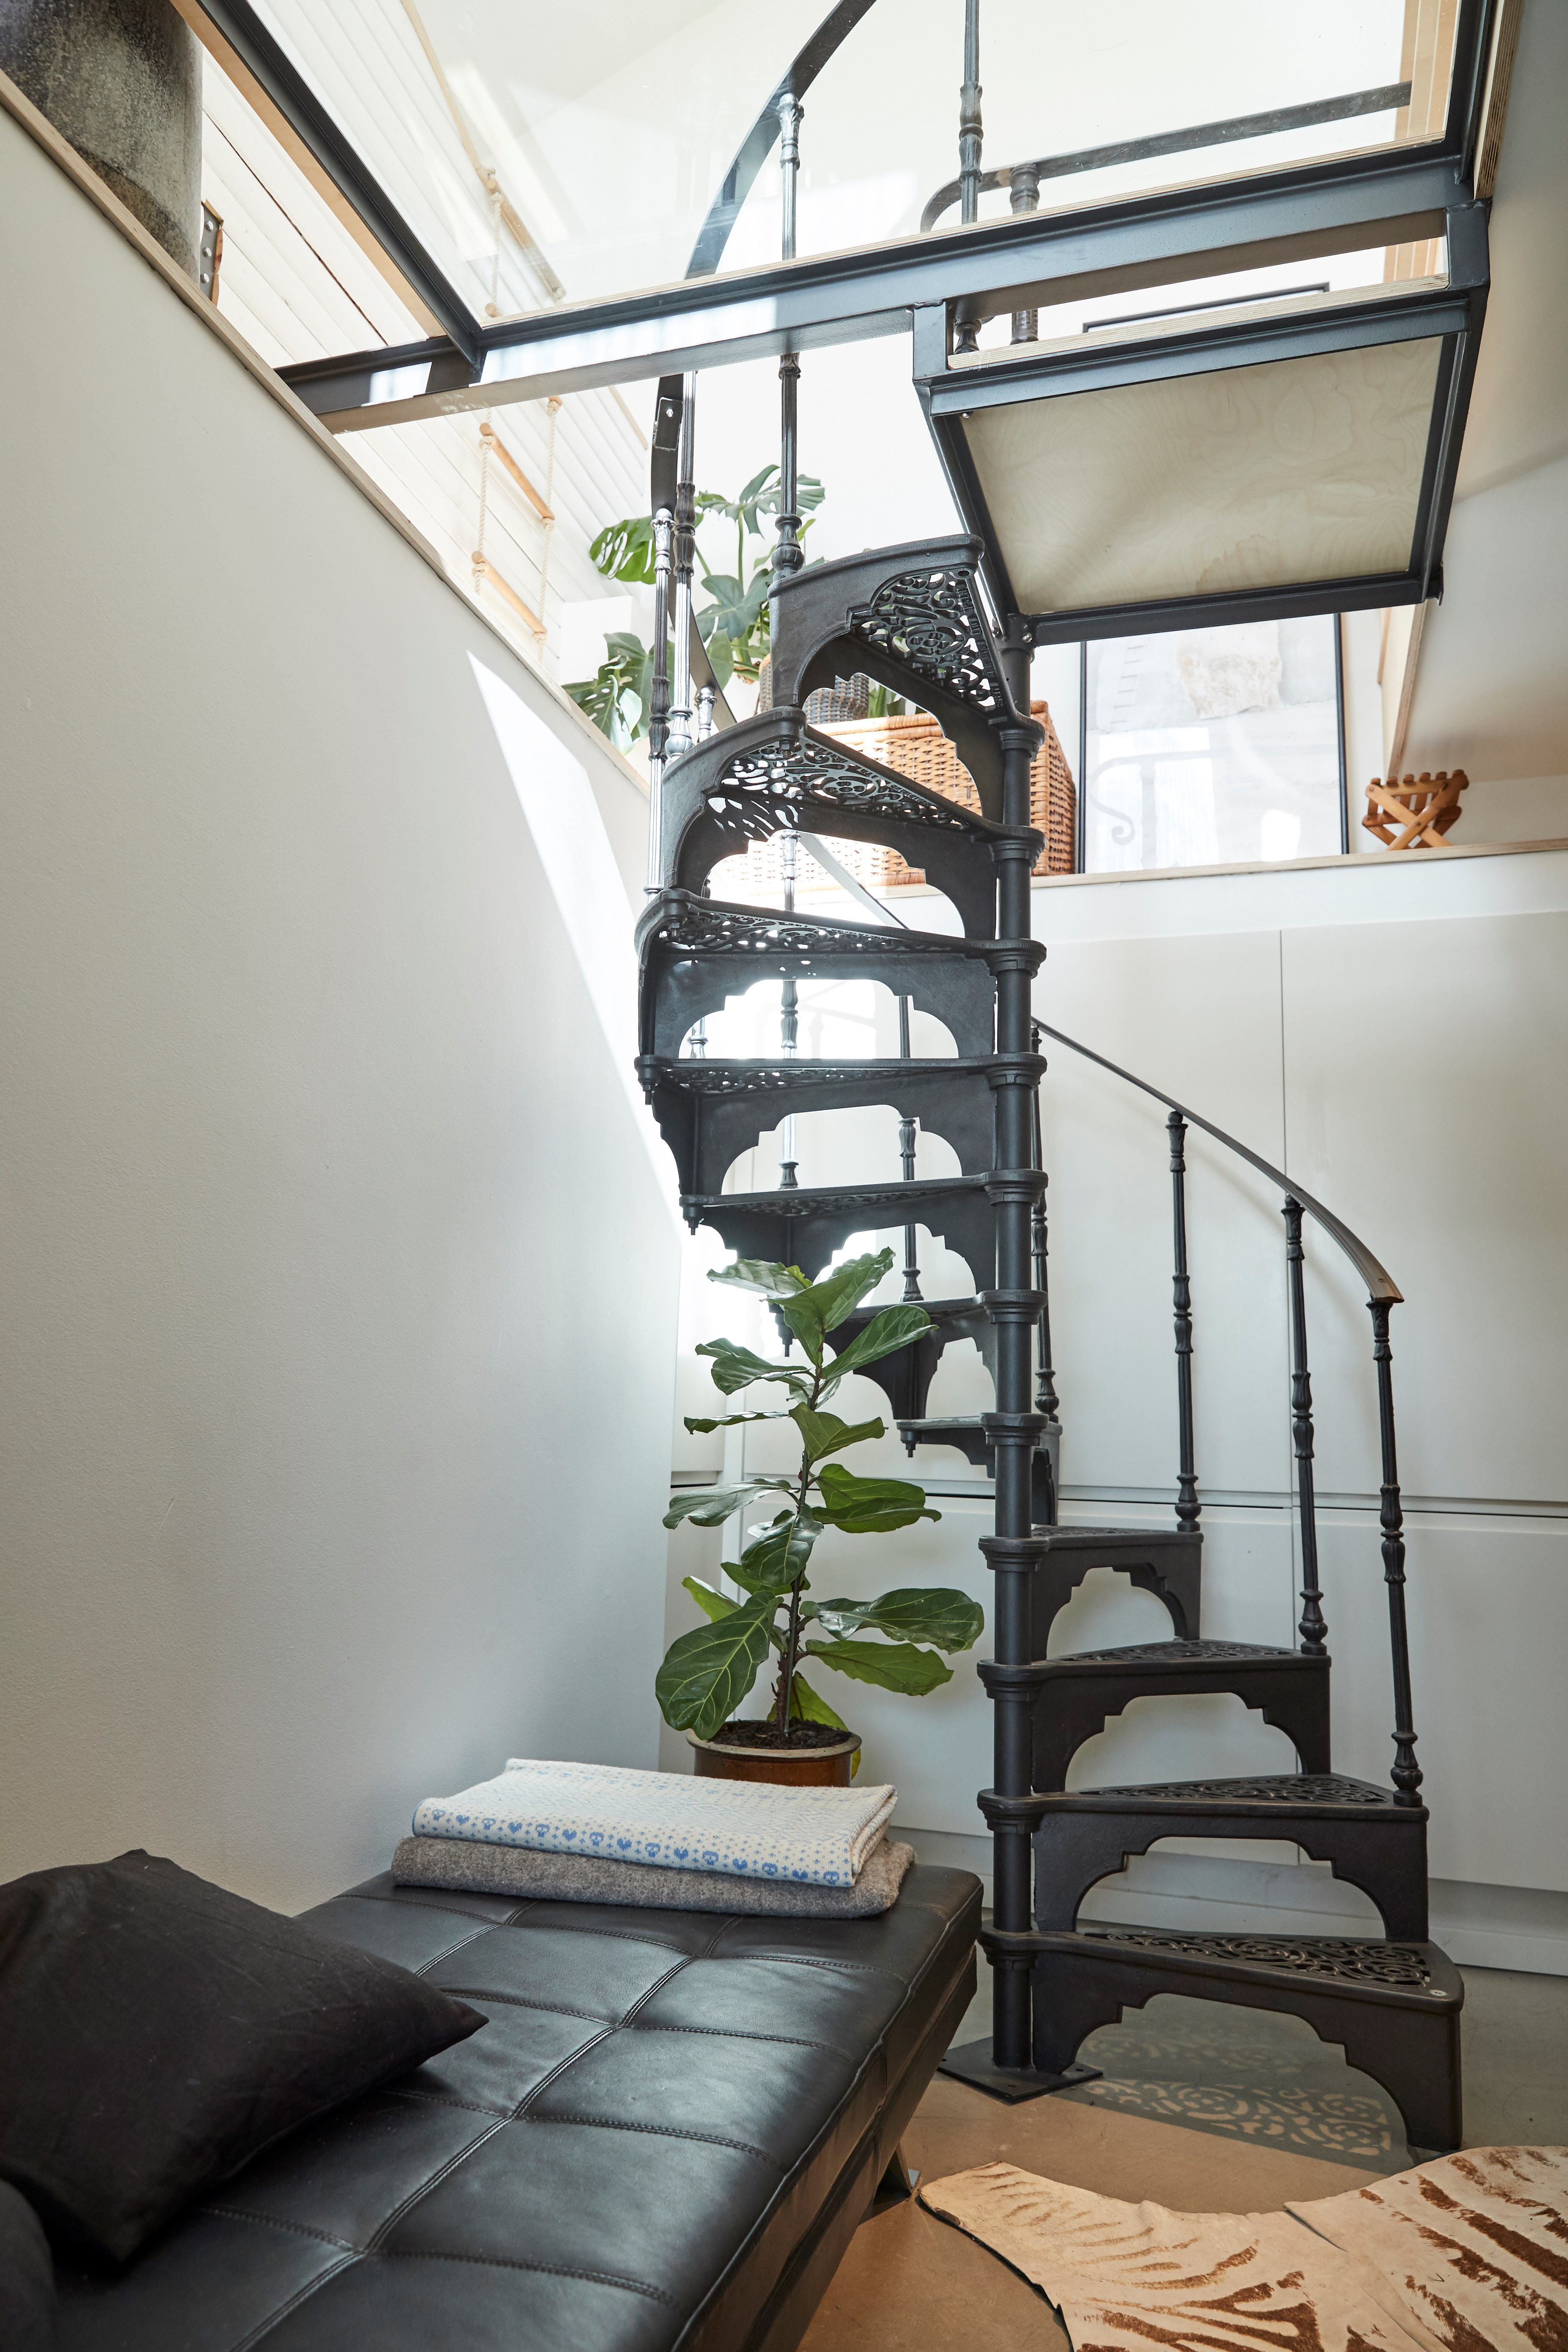 Buy antique spiral staircases for your home from UKAA. Genuine Reclaimed spiral staircases are perfect to use as loft access and for small areas. Read more